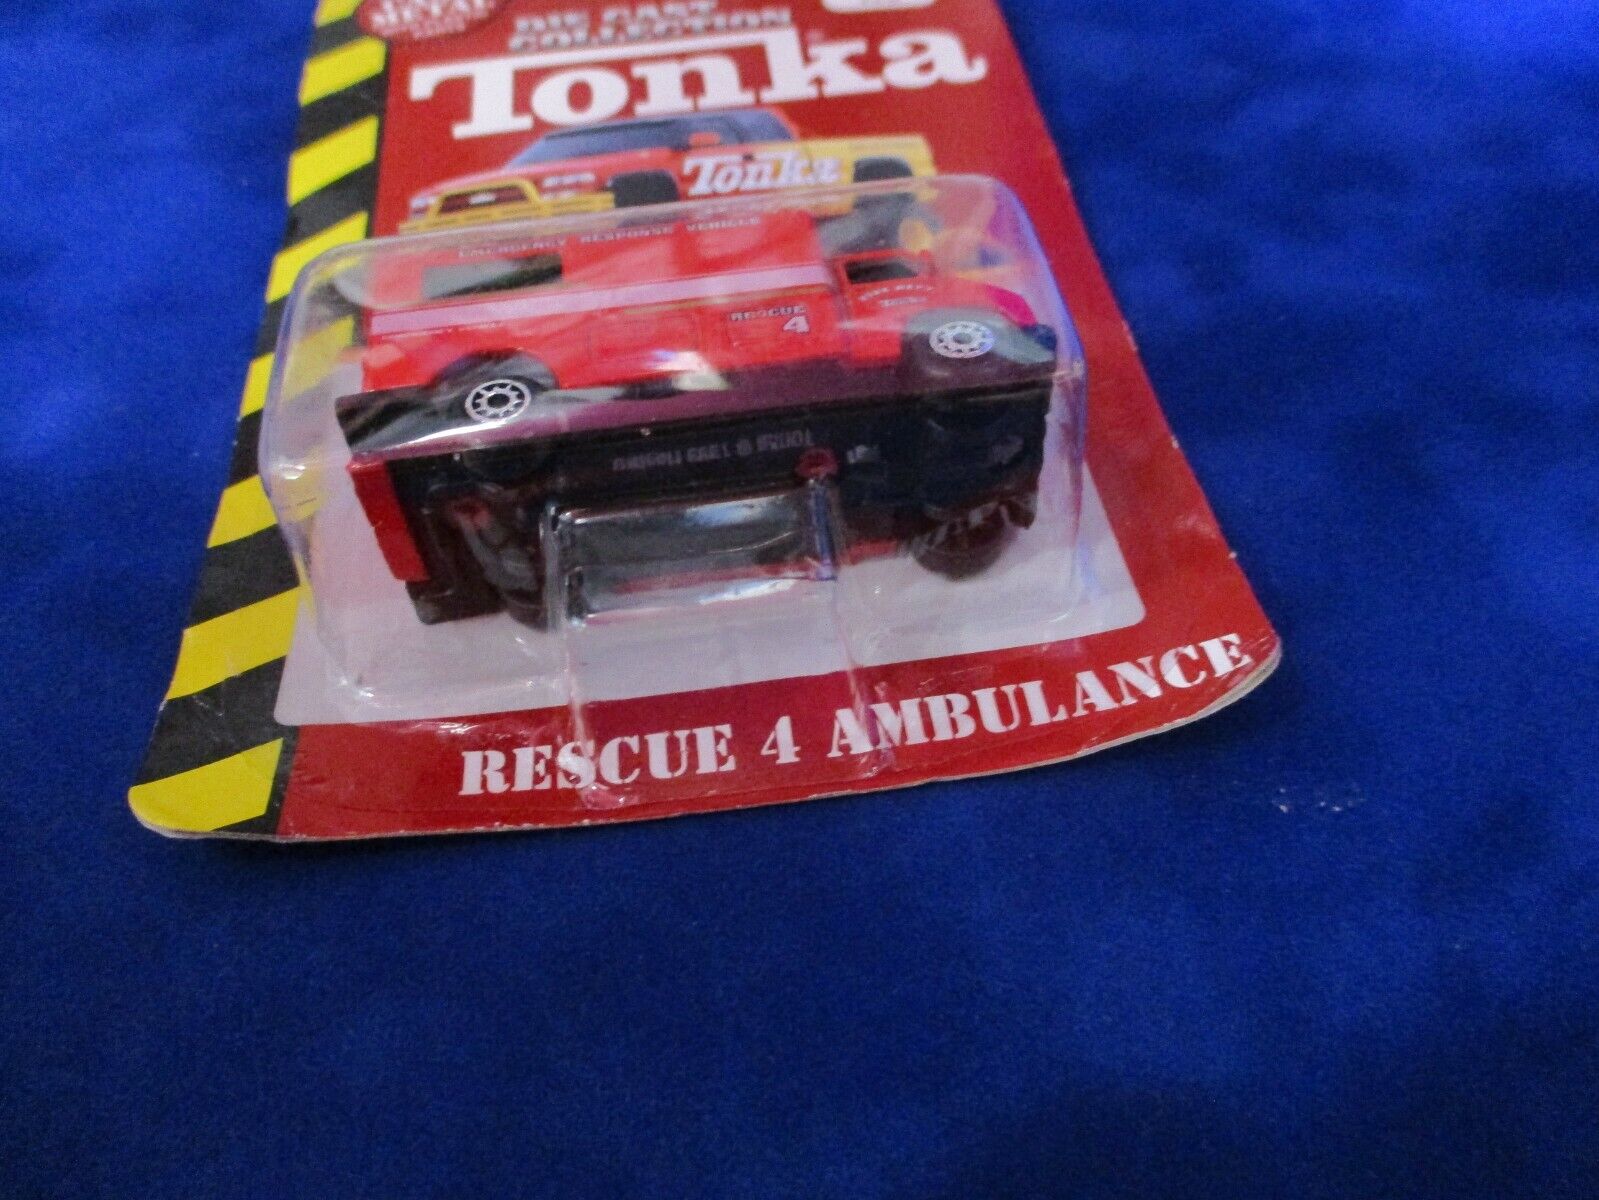 Tonka Die Cast Collection Rescue 4 Ambulance 7/50 Red Emergency Response Vehicl